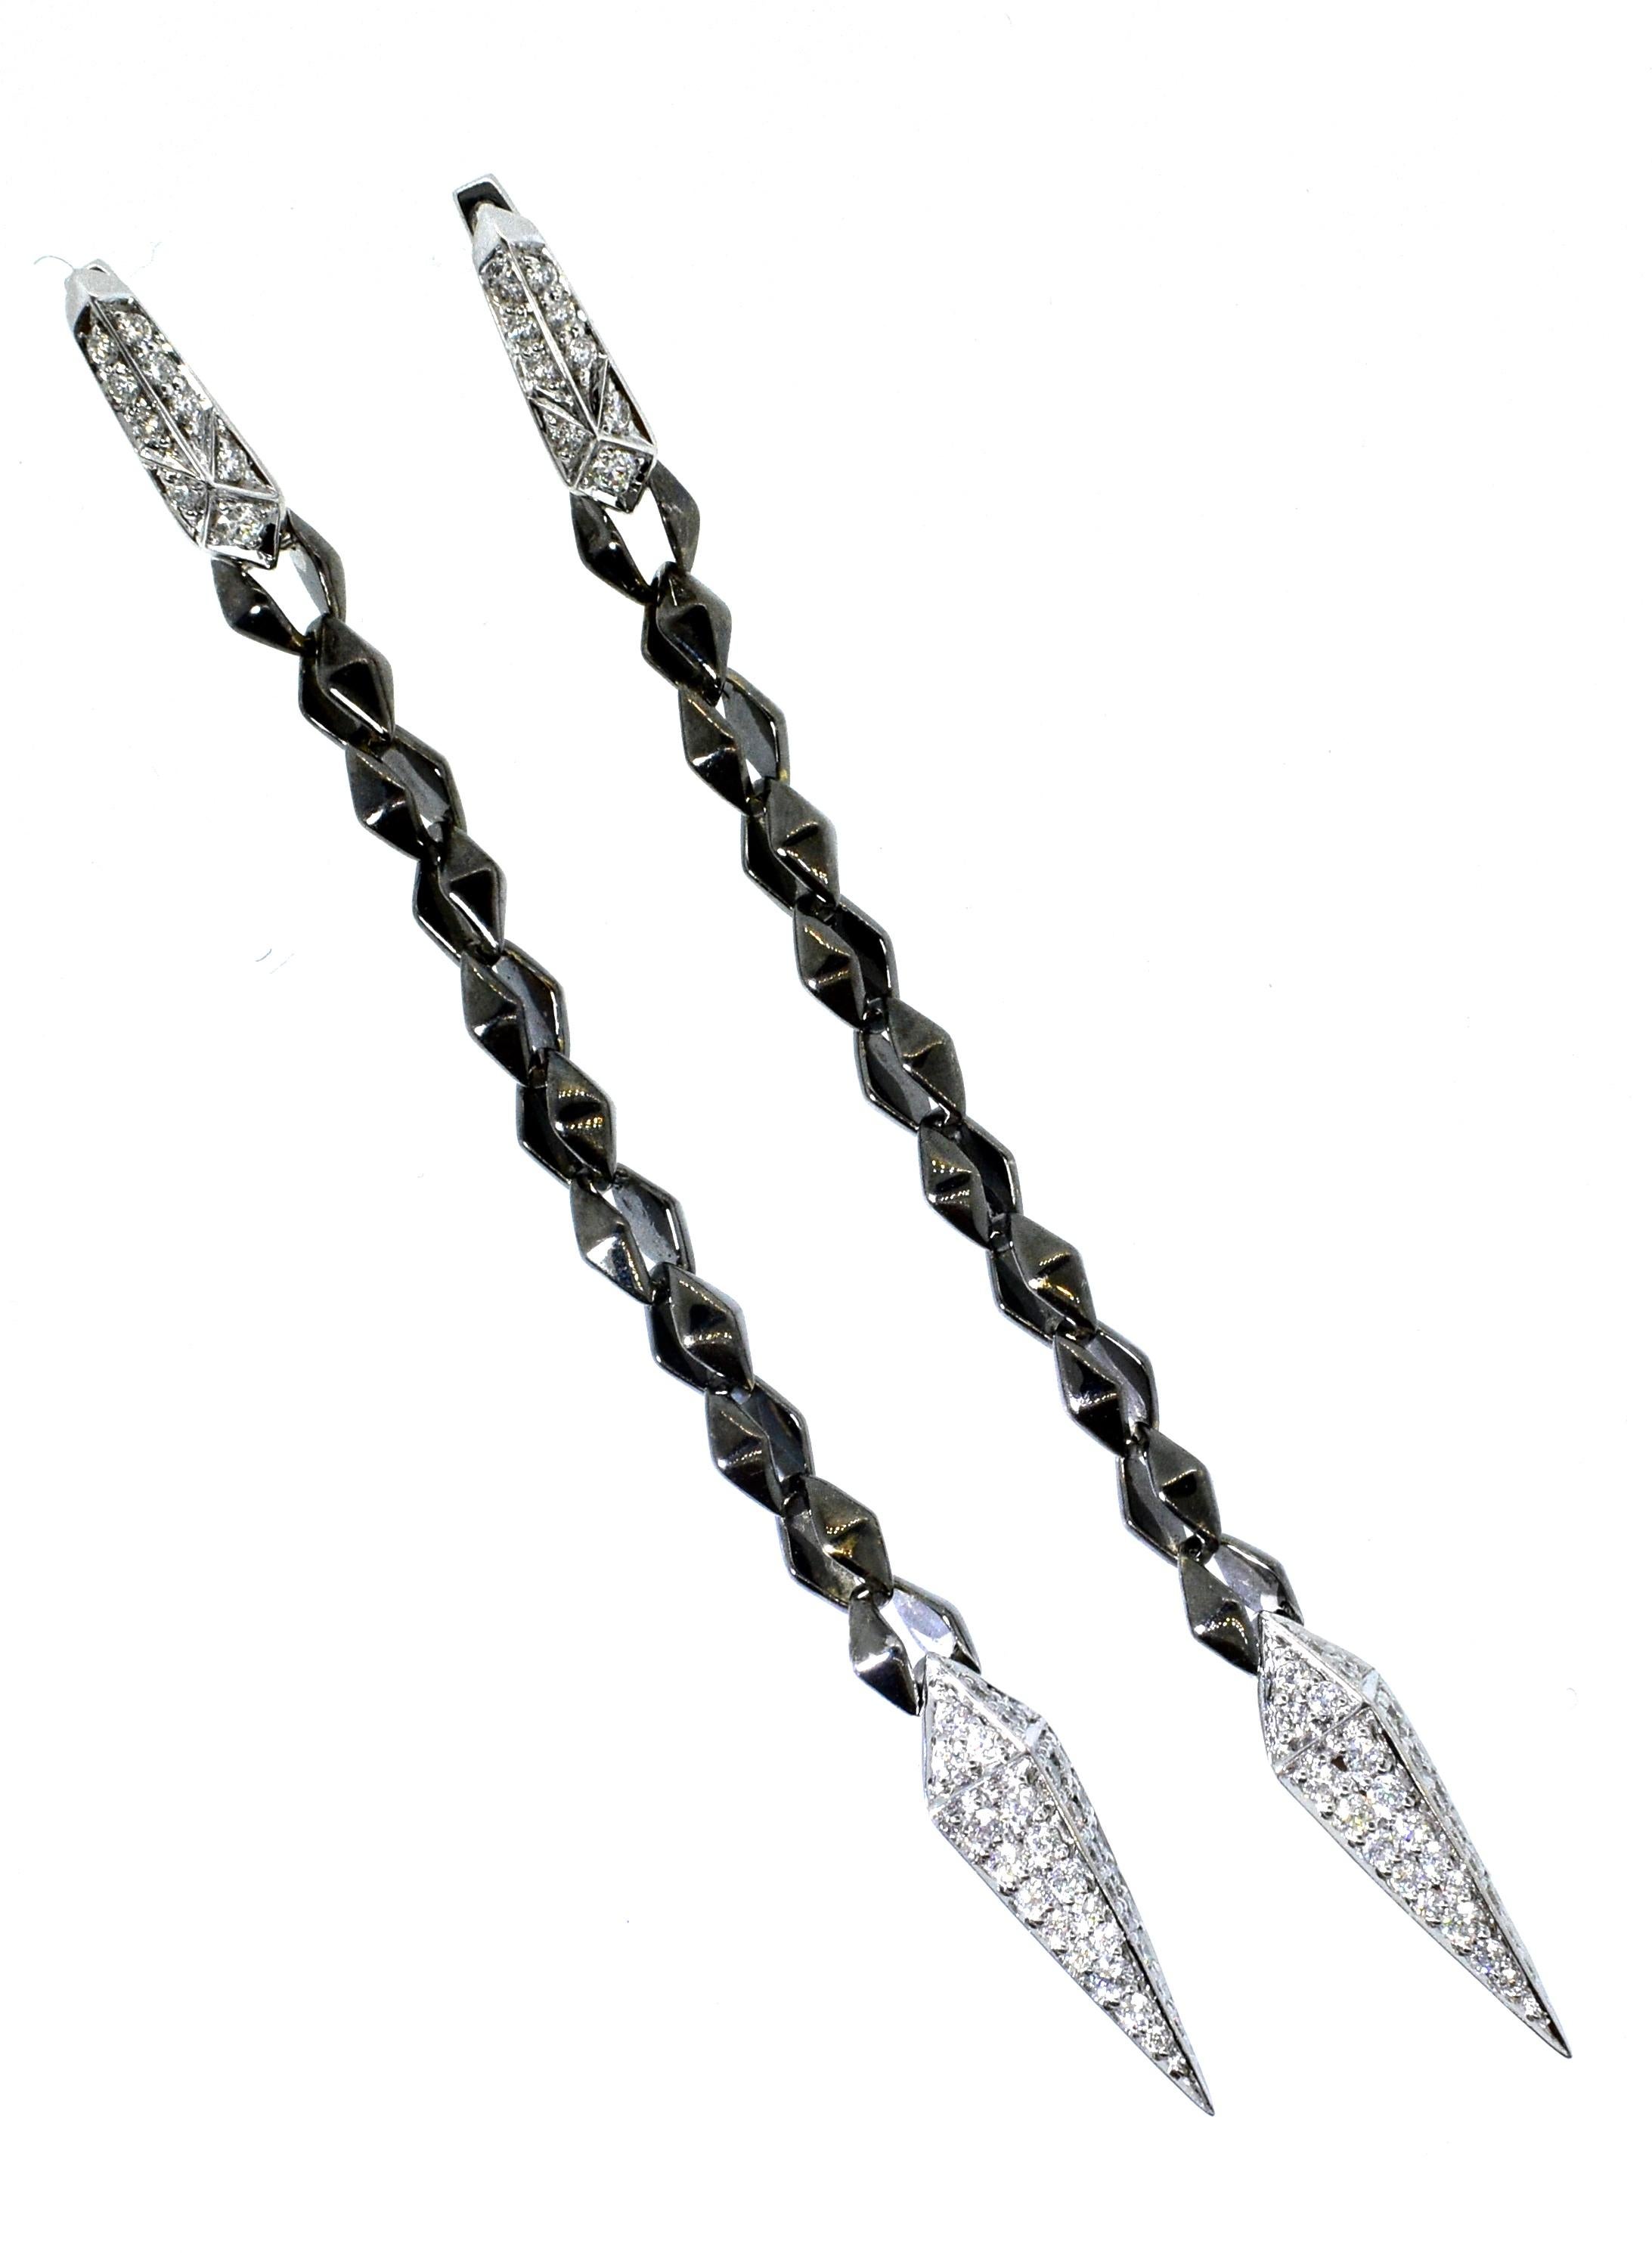 18K white gold and diamond pendant style earrings with .90 cts. of very fine white diamonds, F/G, VS, (colorless to near colorless and very slightly included), these earrings are 18K white and blackened gold.  They are 3.25 inches long.  Signed, SW